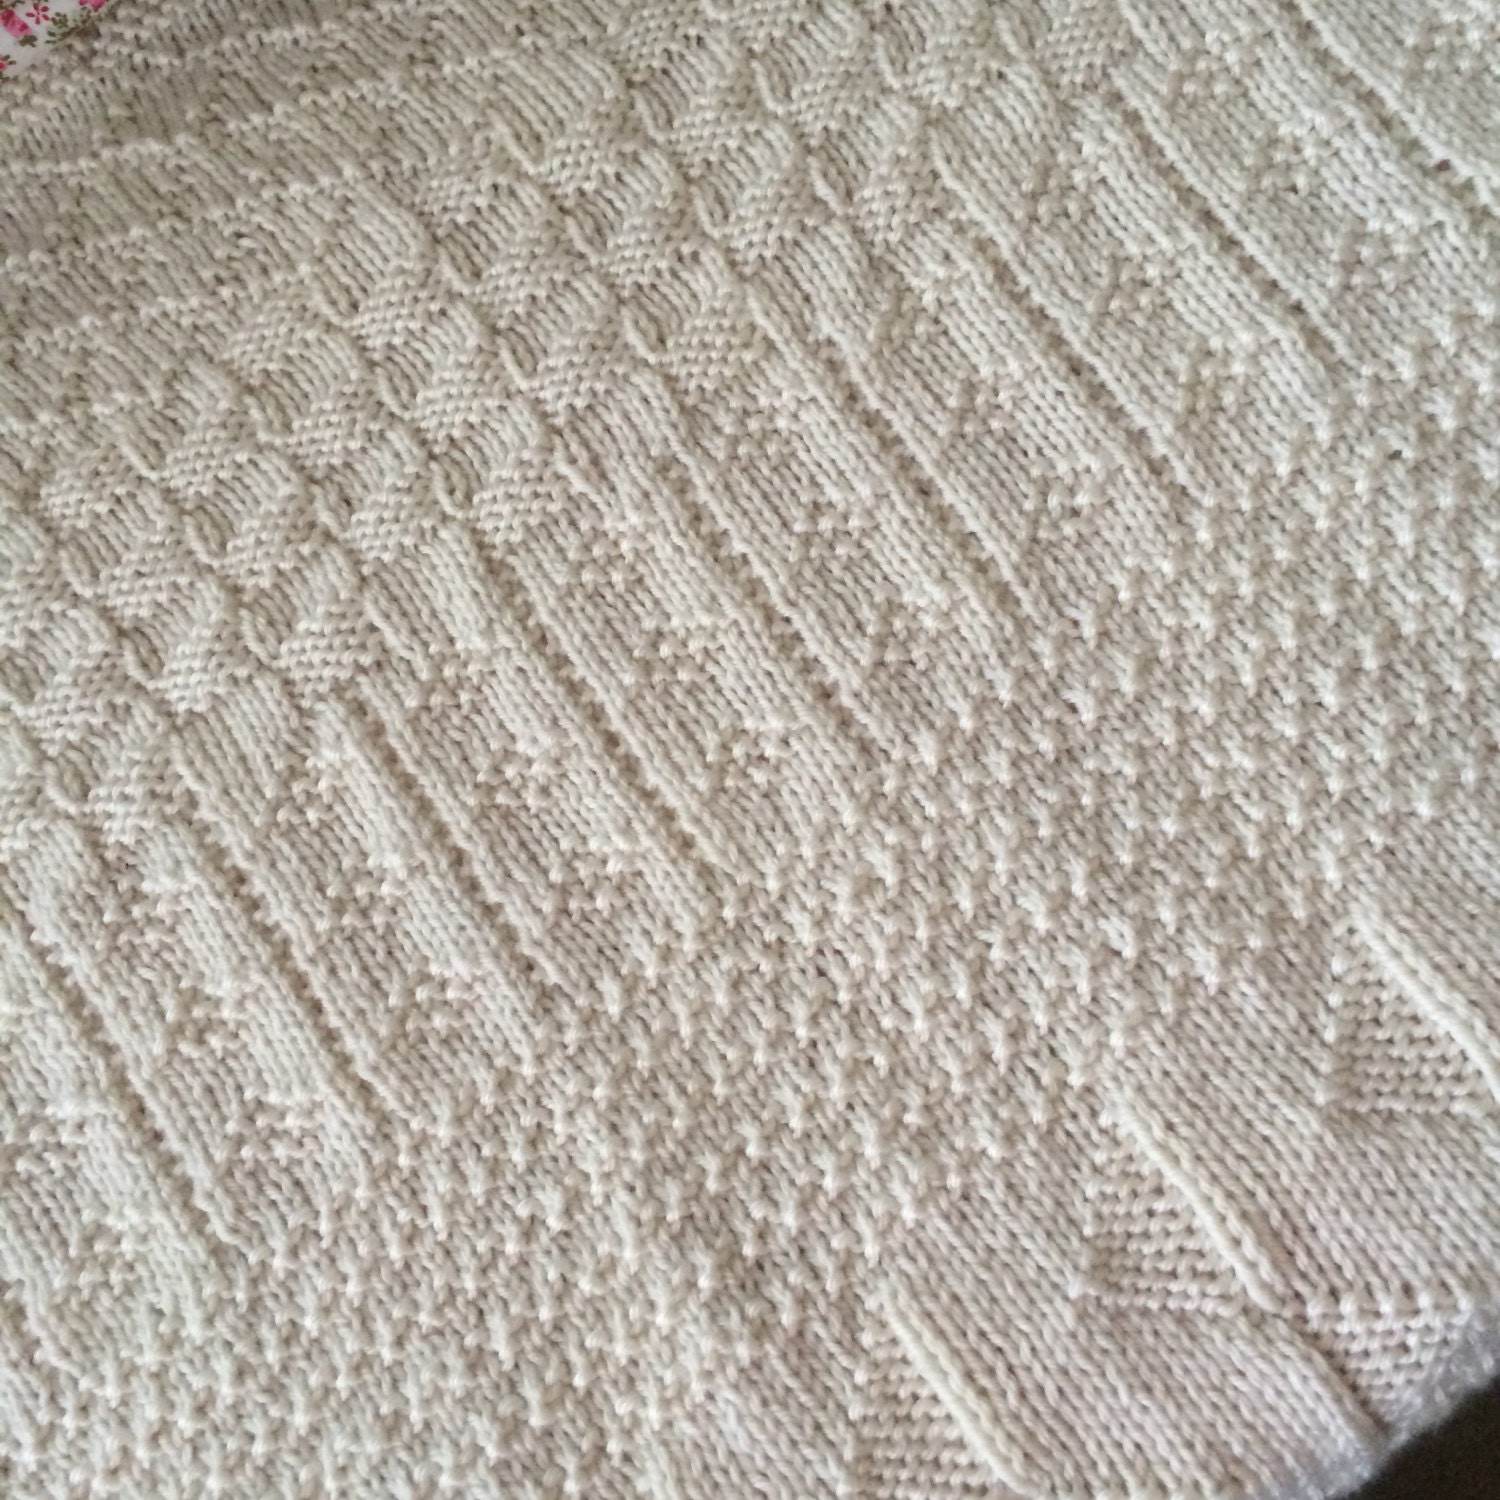 Textured Baby Blanket Knitting Pattern PDF Instant Download - Etsy